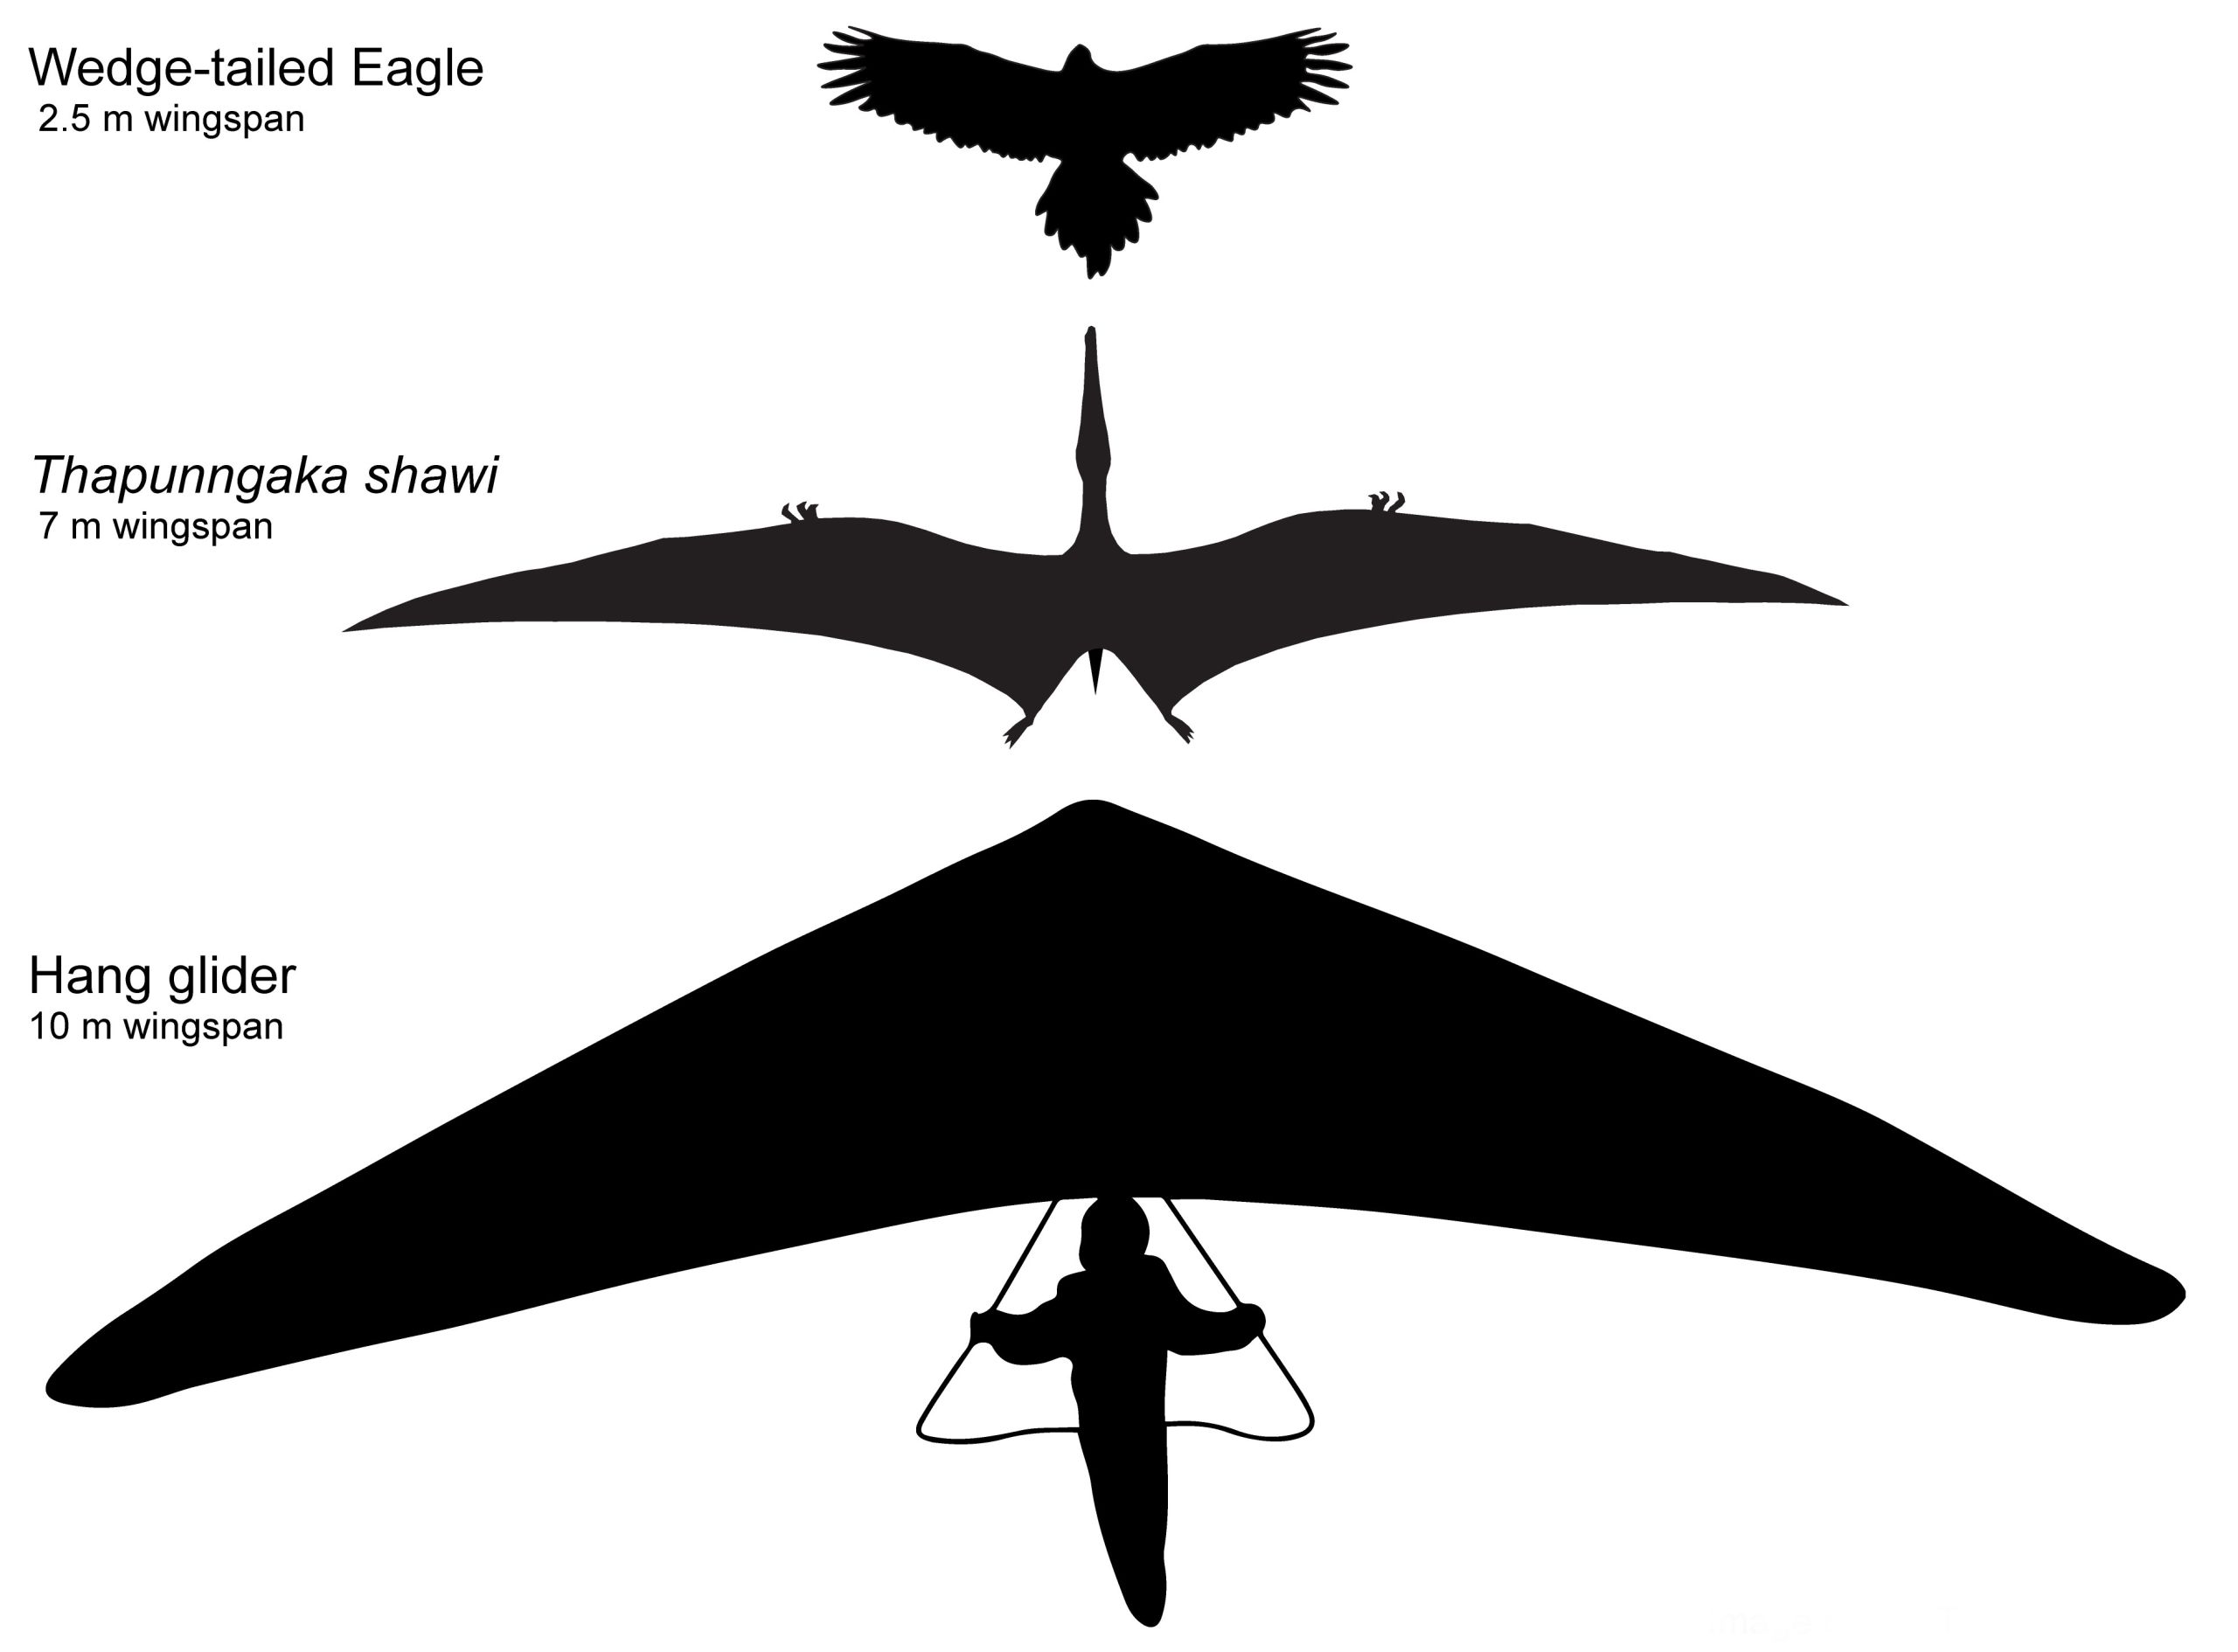 Hypothetical outline of Thapunngaka shawi with a 7 m wingspan, alongside a wedge-tailed eagle (2.5 m wingspan) and a hang-glider (10 m ‘wingspan’). Tim Richards